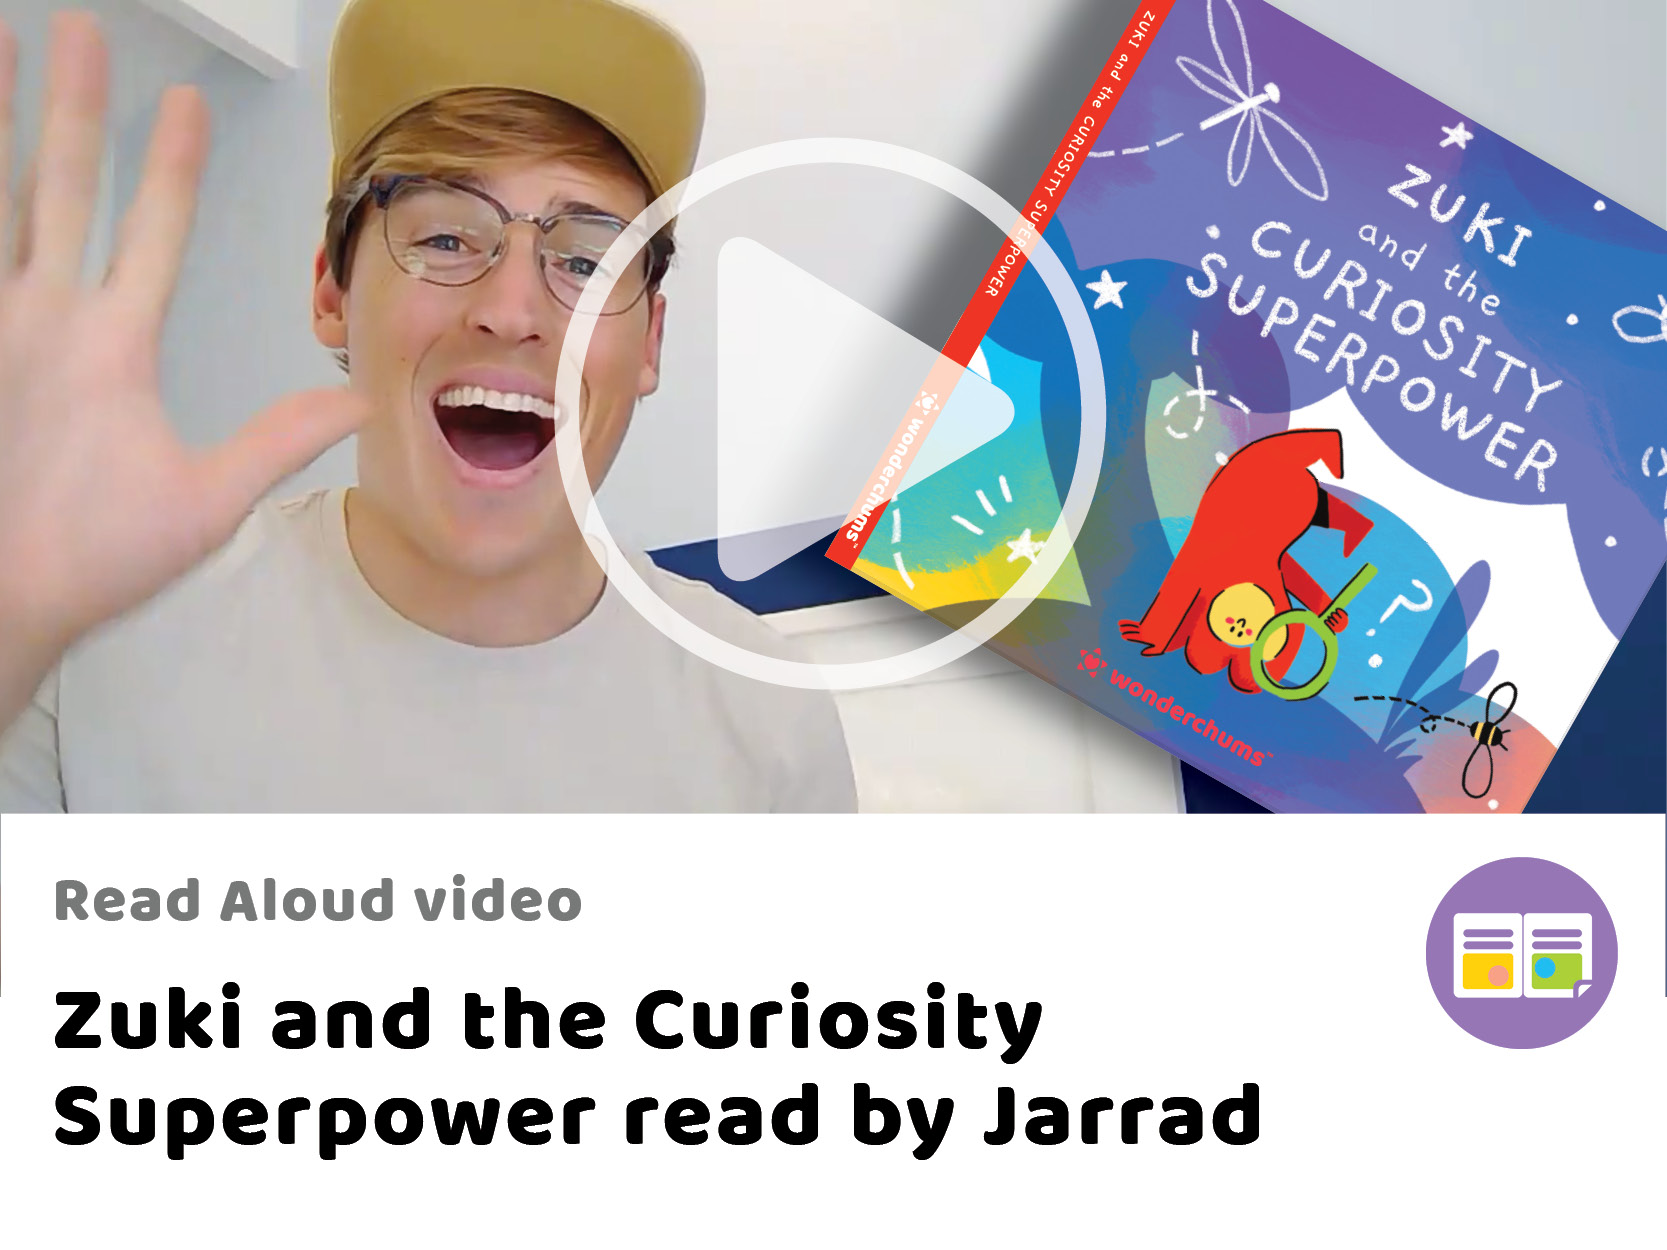 Read Aloud of "Zuki and the Curiosity Superpower" with Jarrad Dober from Wonderchums